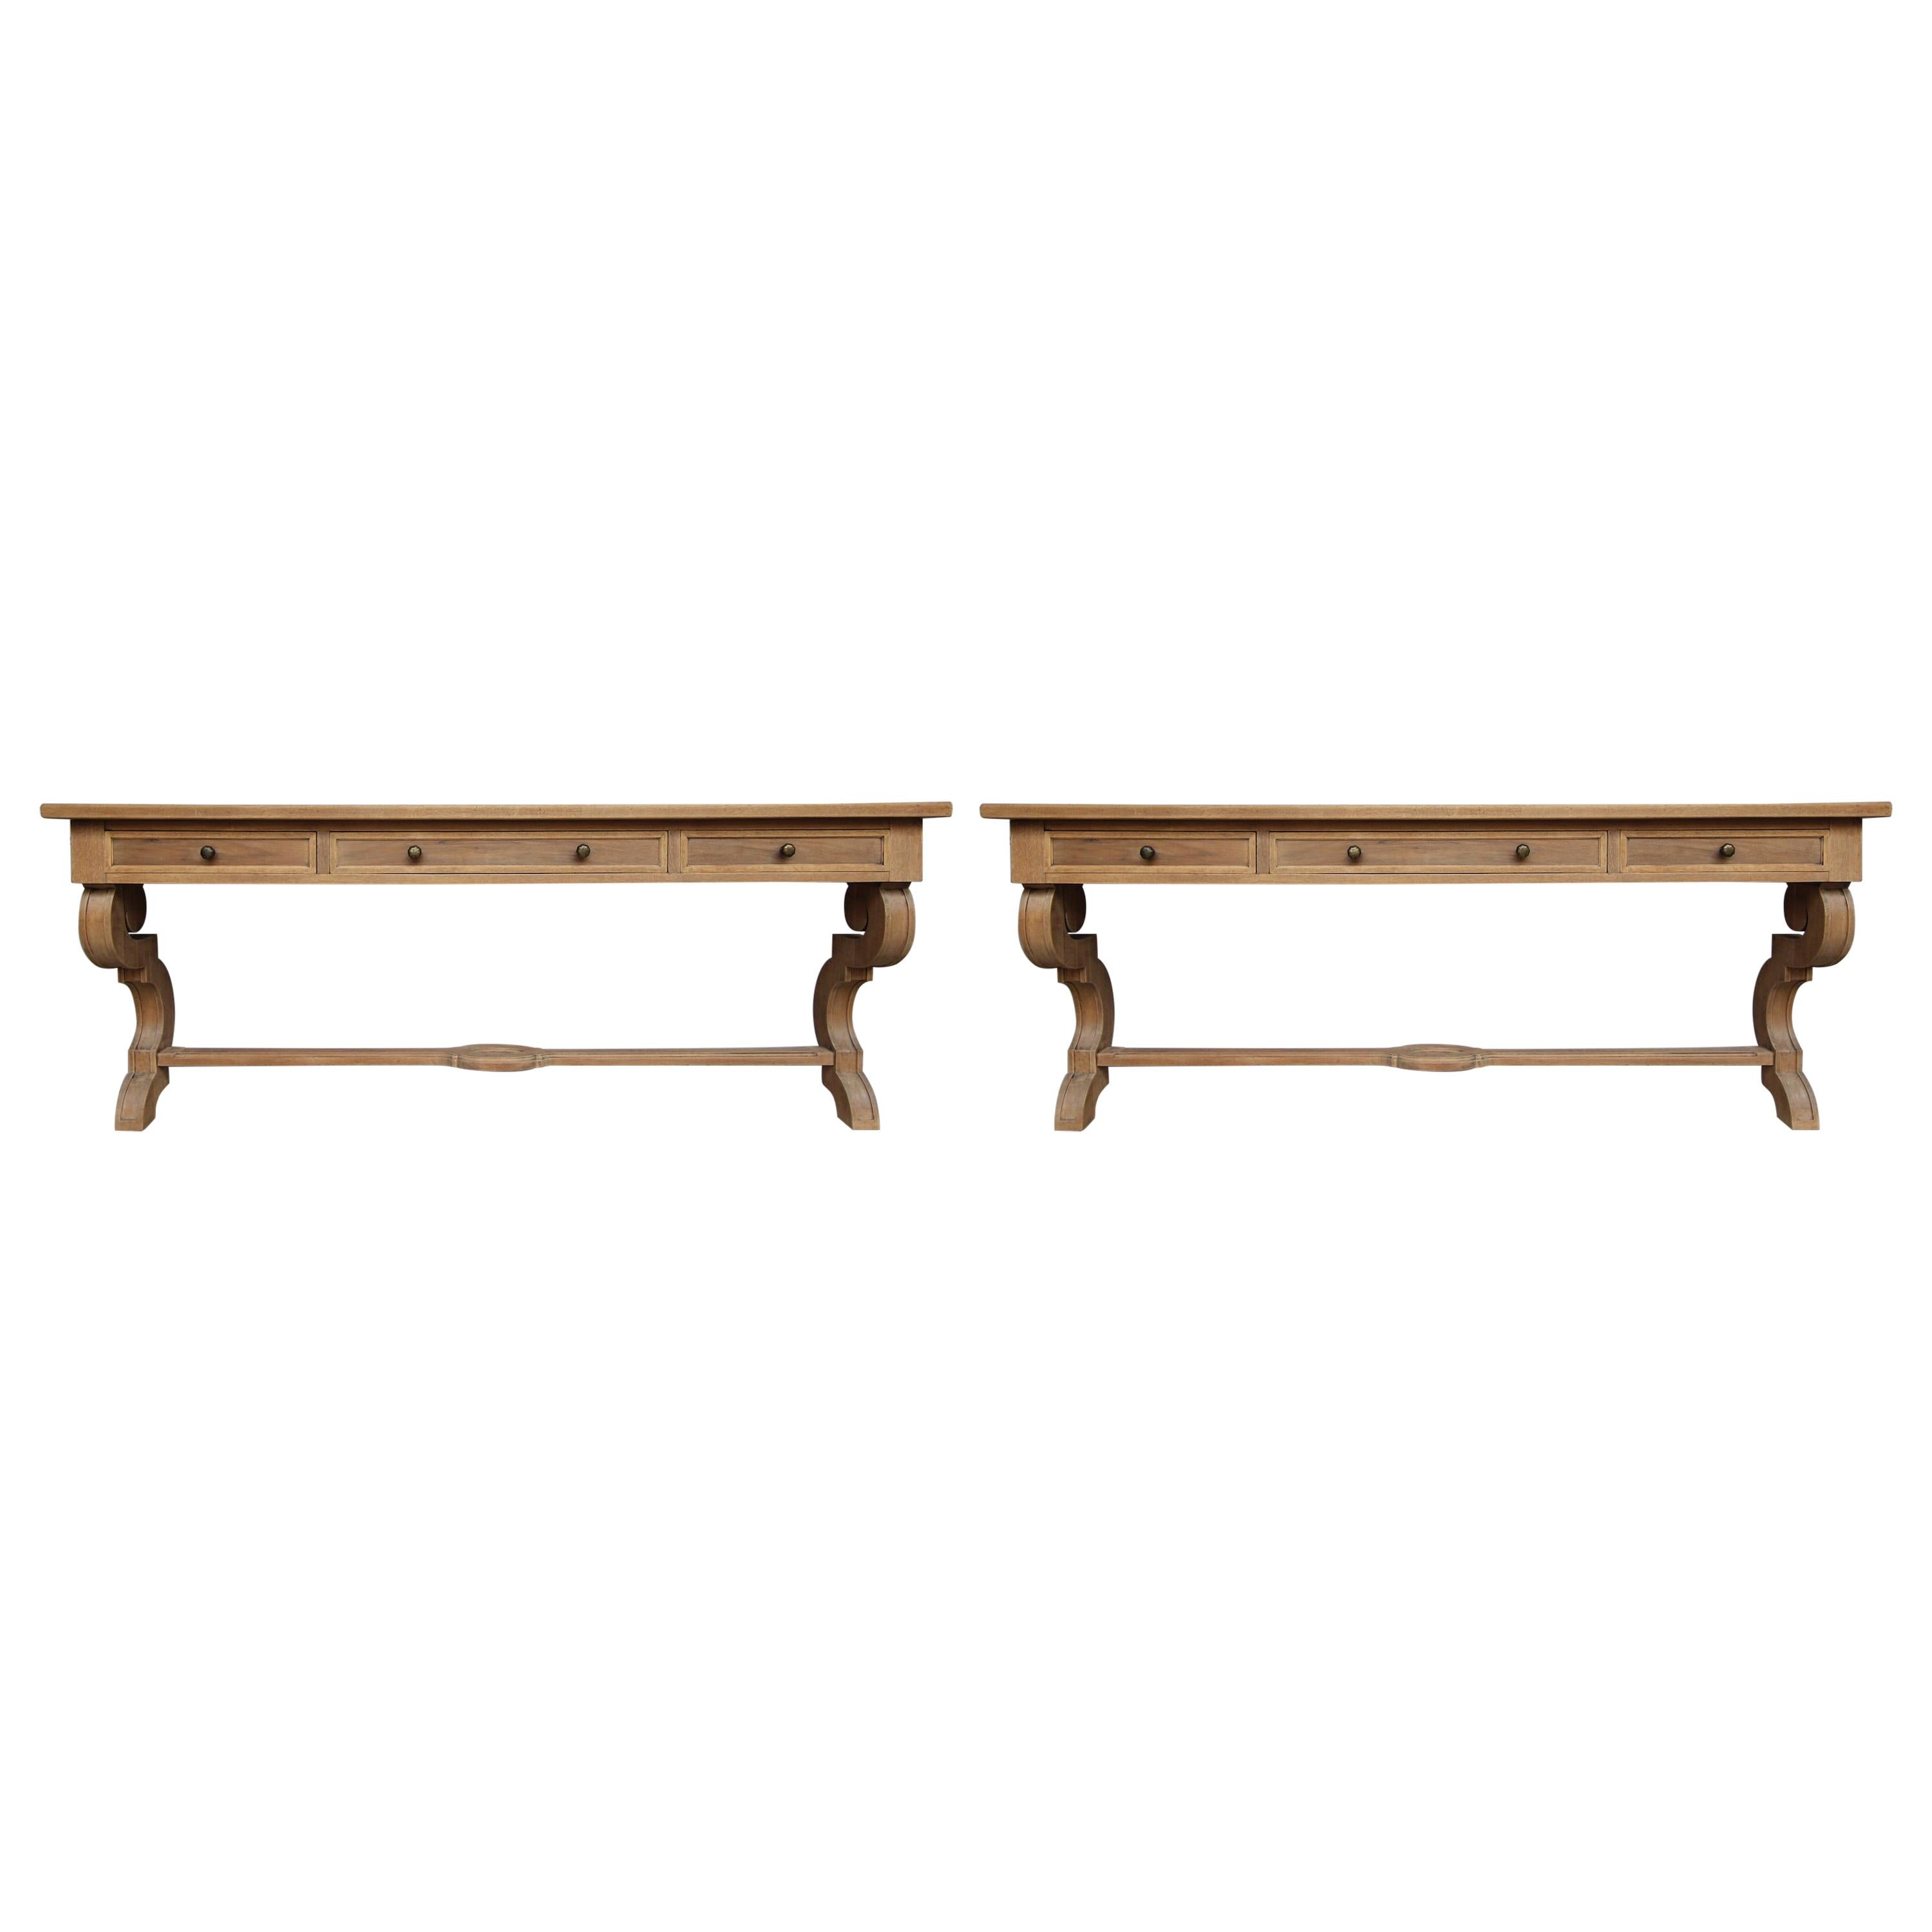 Pair of Early 20th Century German Pharmacy Console Tables